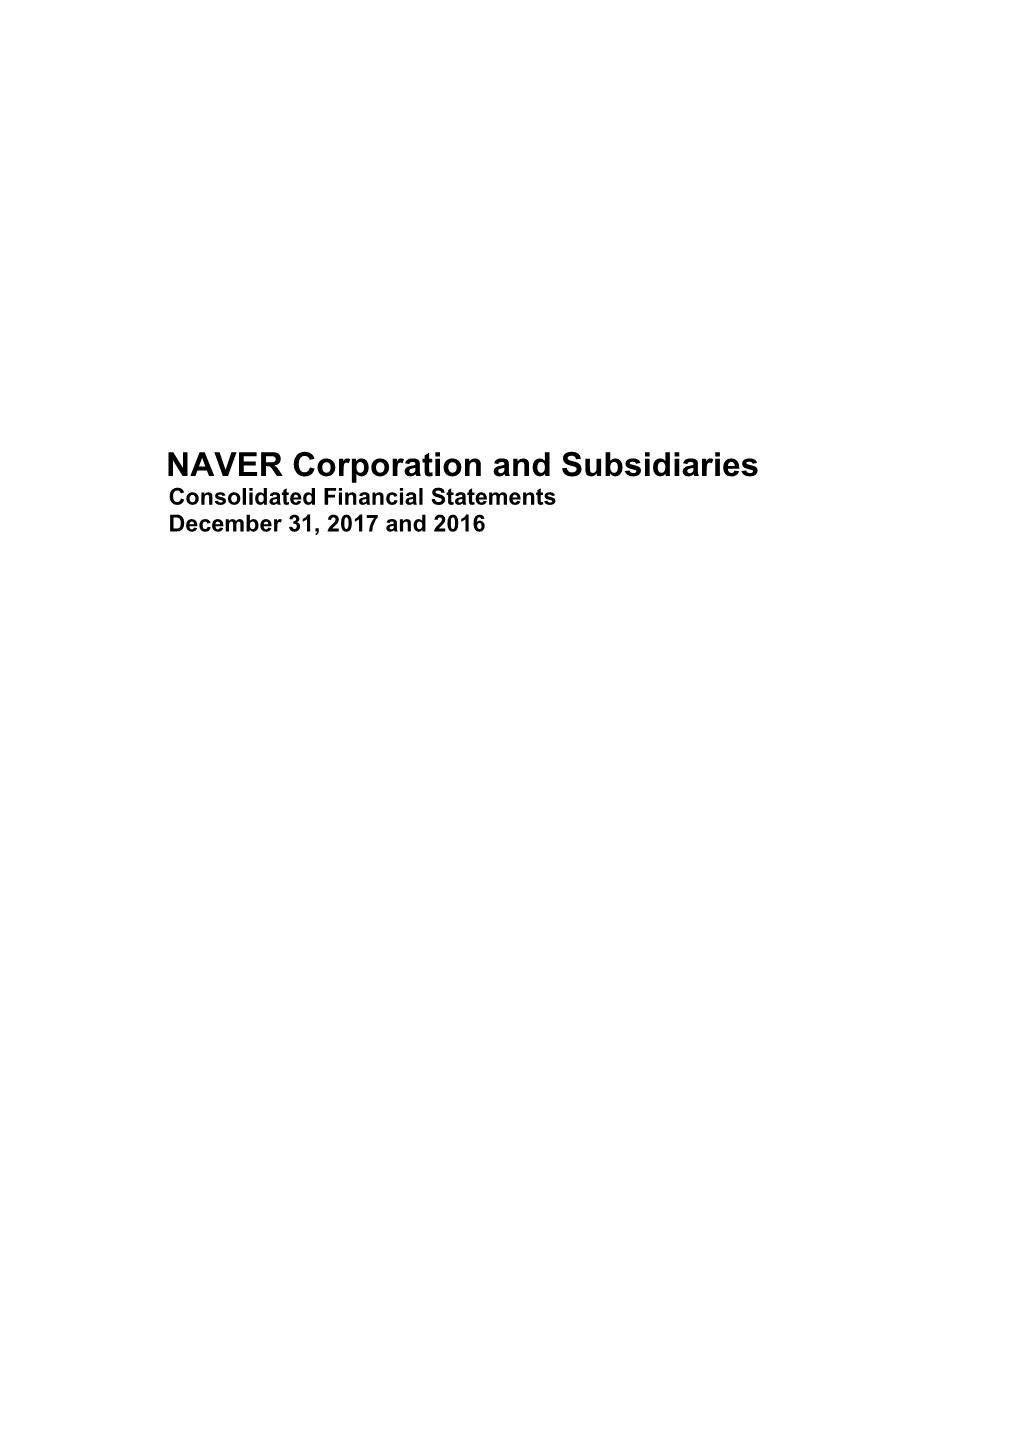 NAVER Corporation and Subsidiaries Consolidated Financial Statements December 31, 2017 and 2016